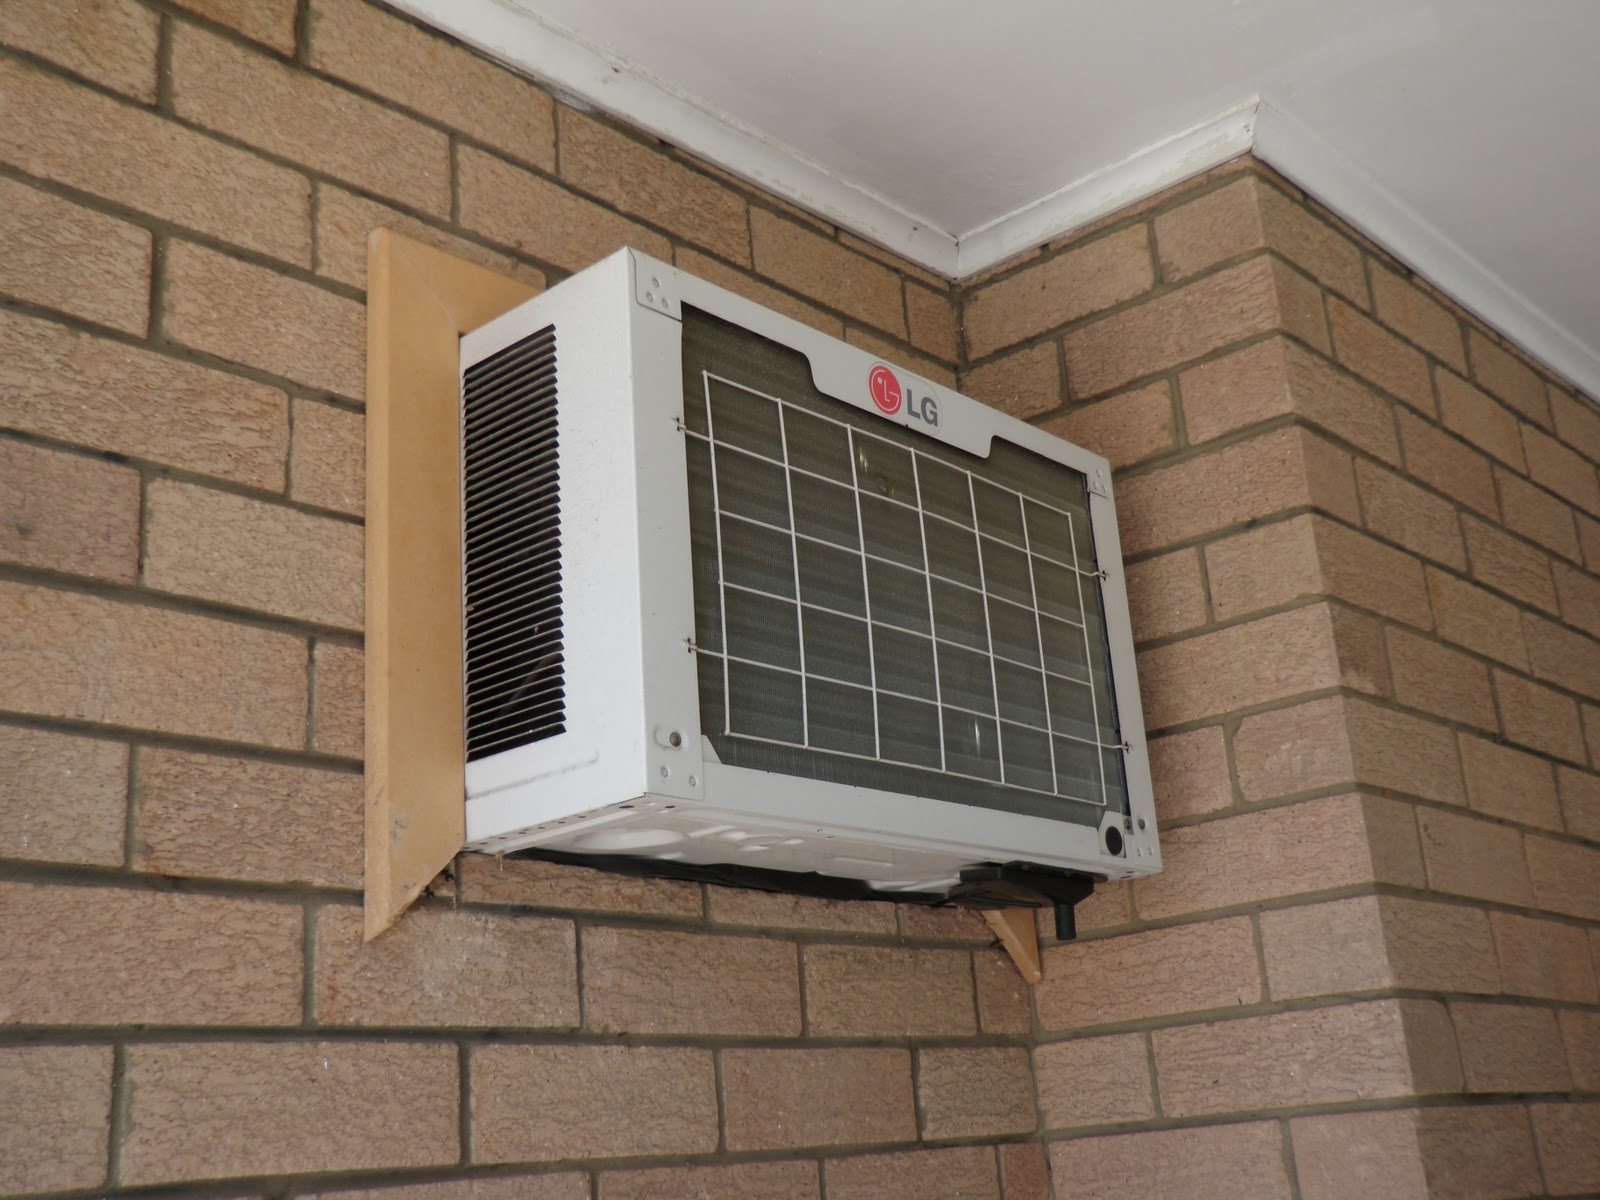 An old air conditioning unit can breakdown easily